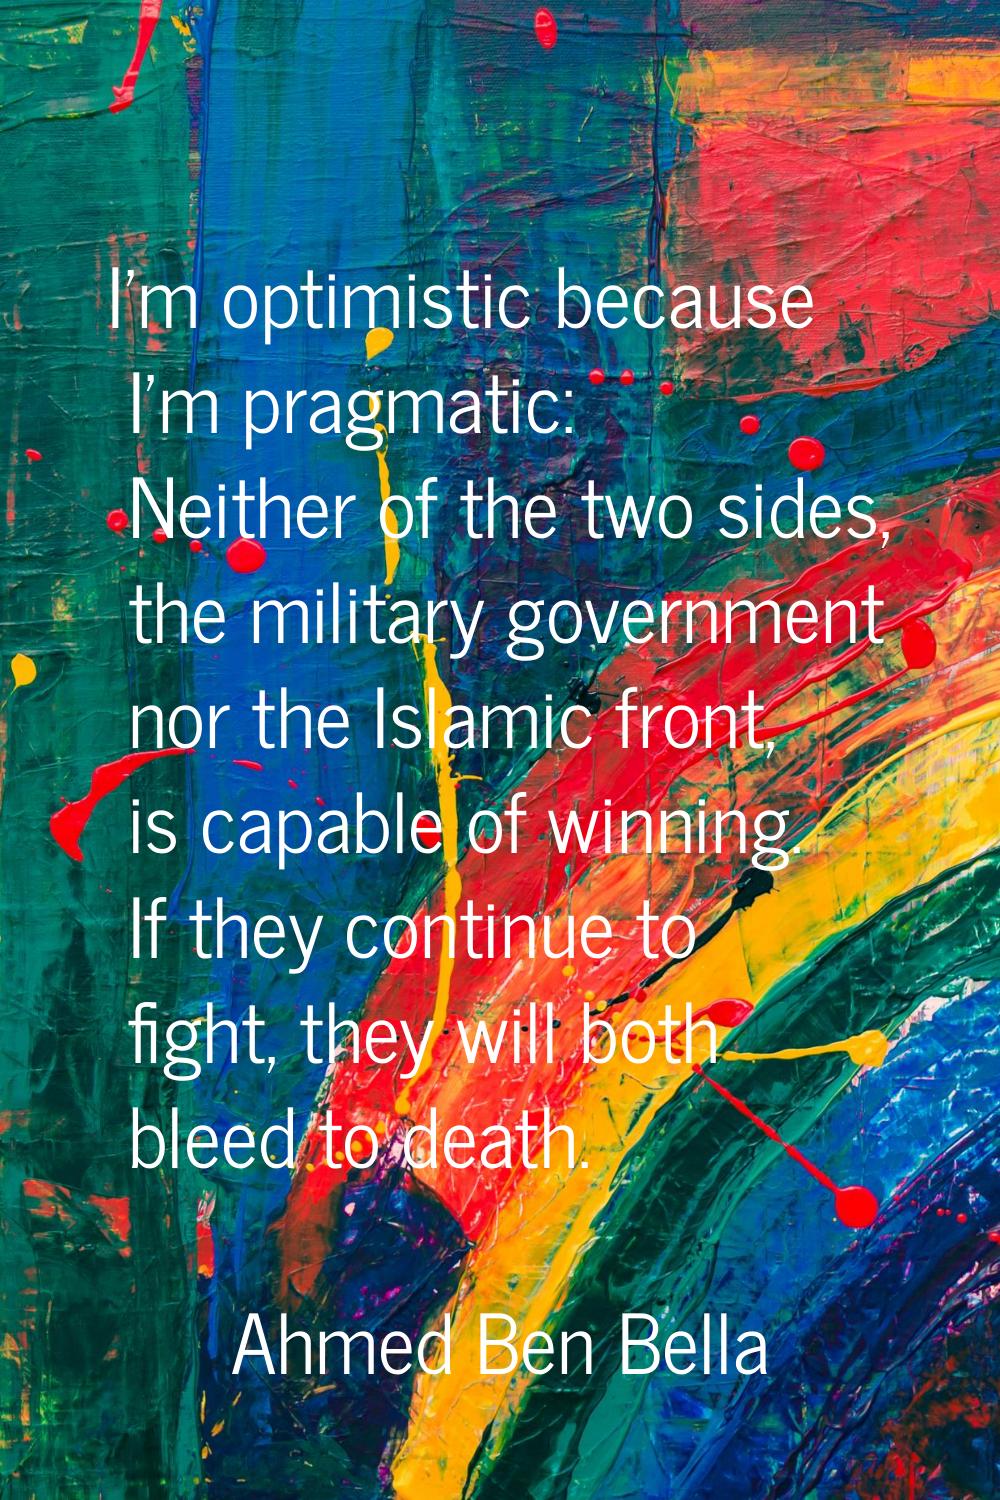 I'm optimistic because I'm pragmatic: Neither of the two sides, the military government nor the Isl